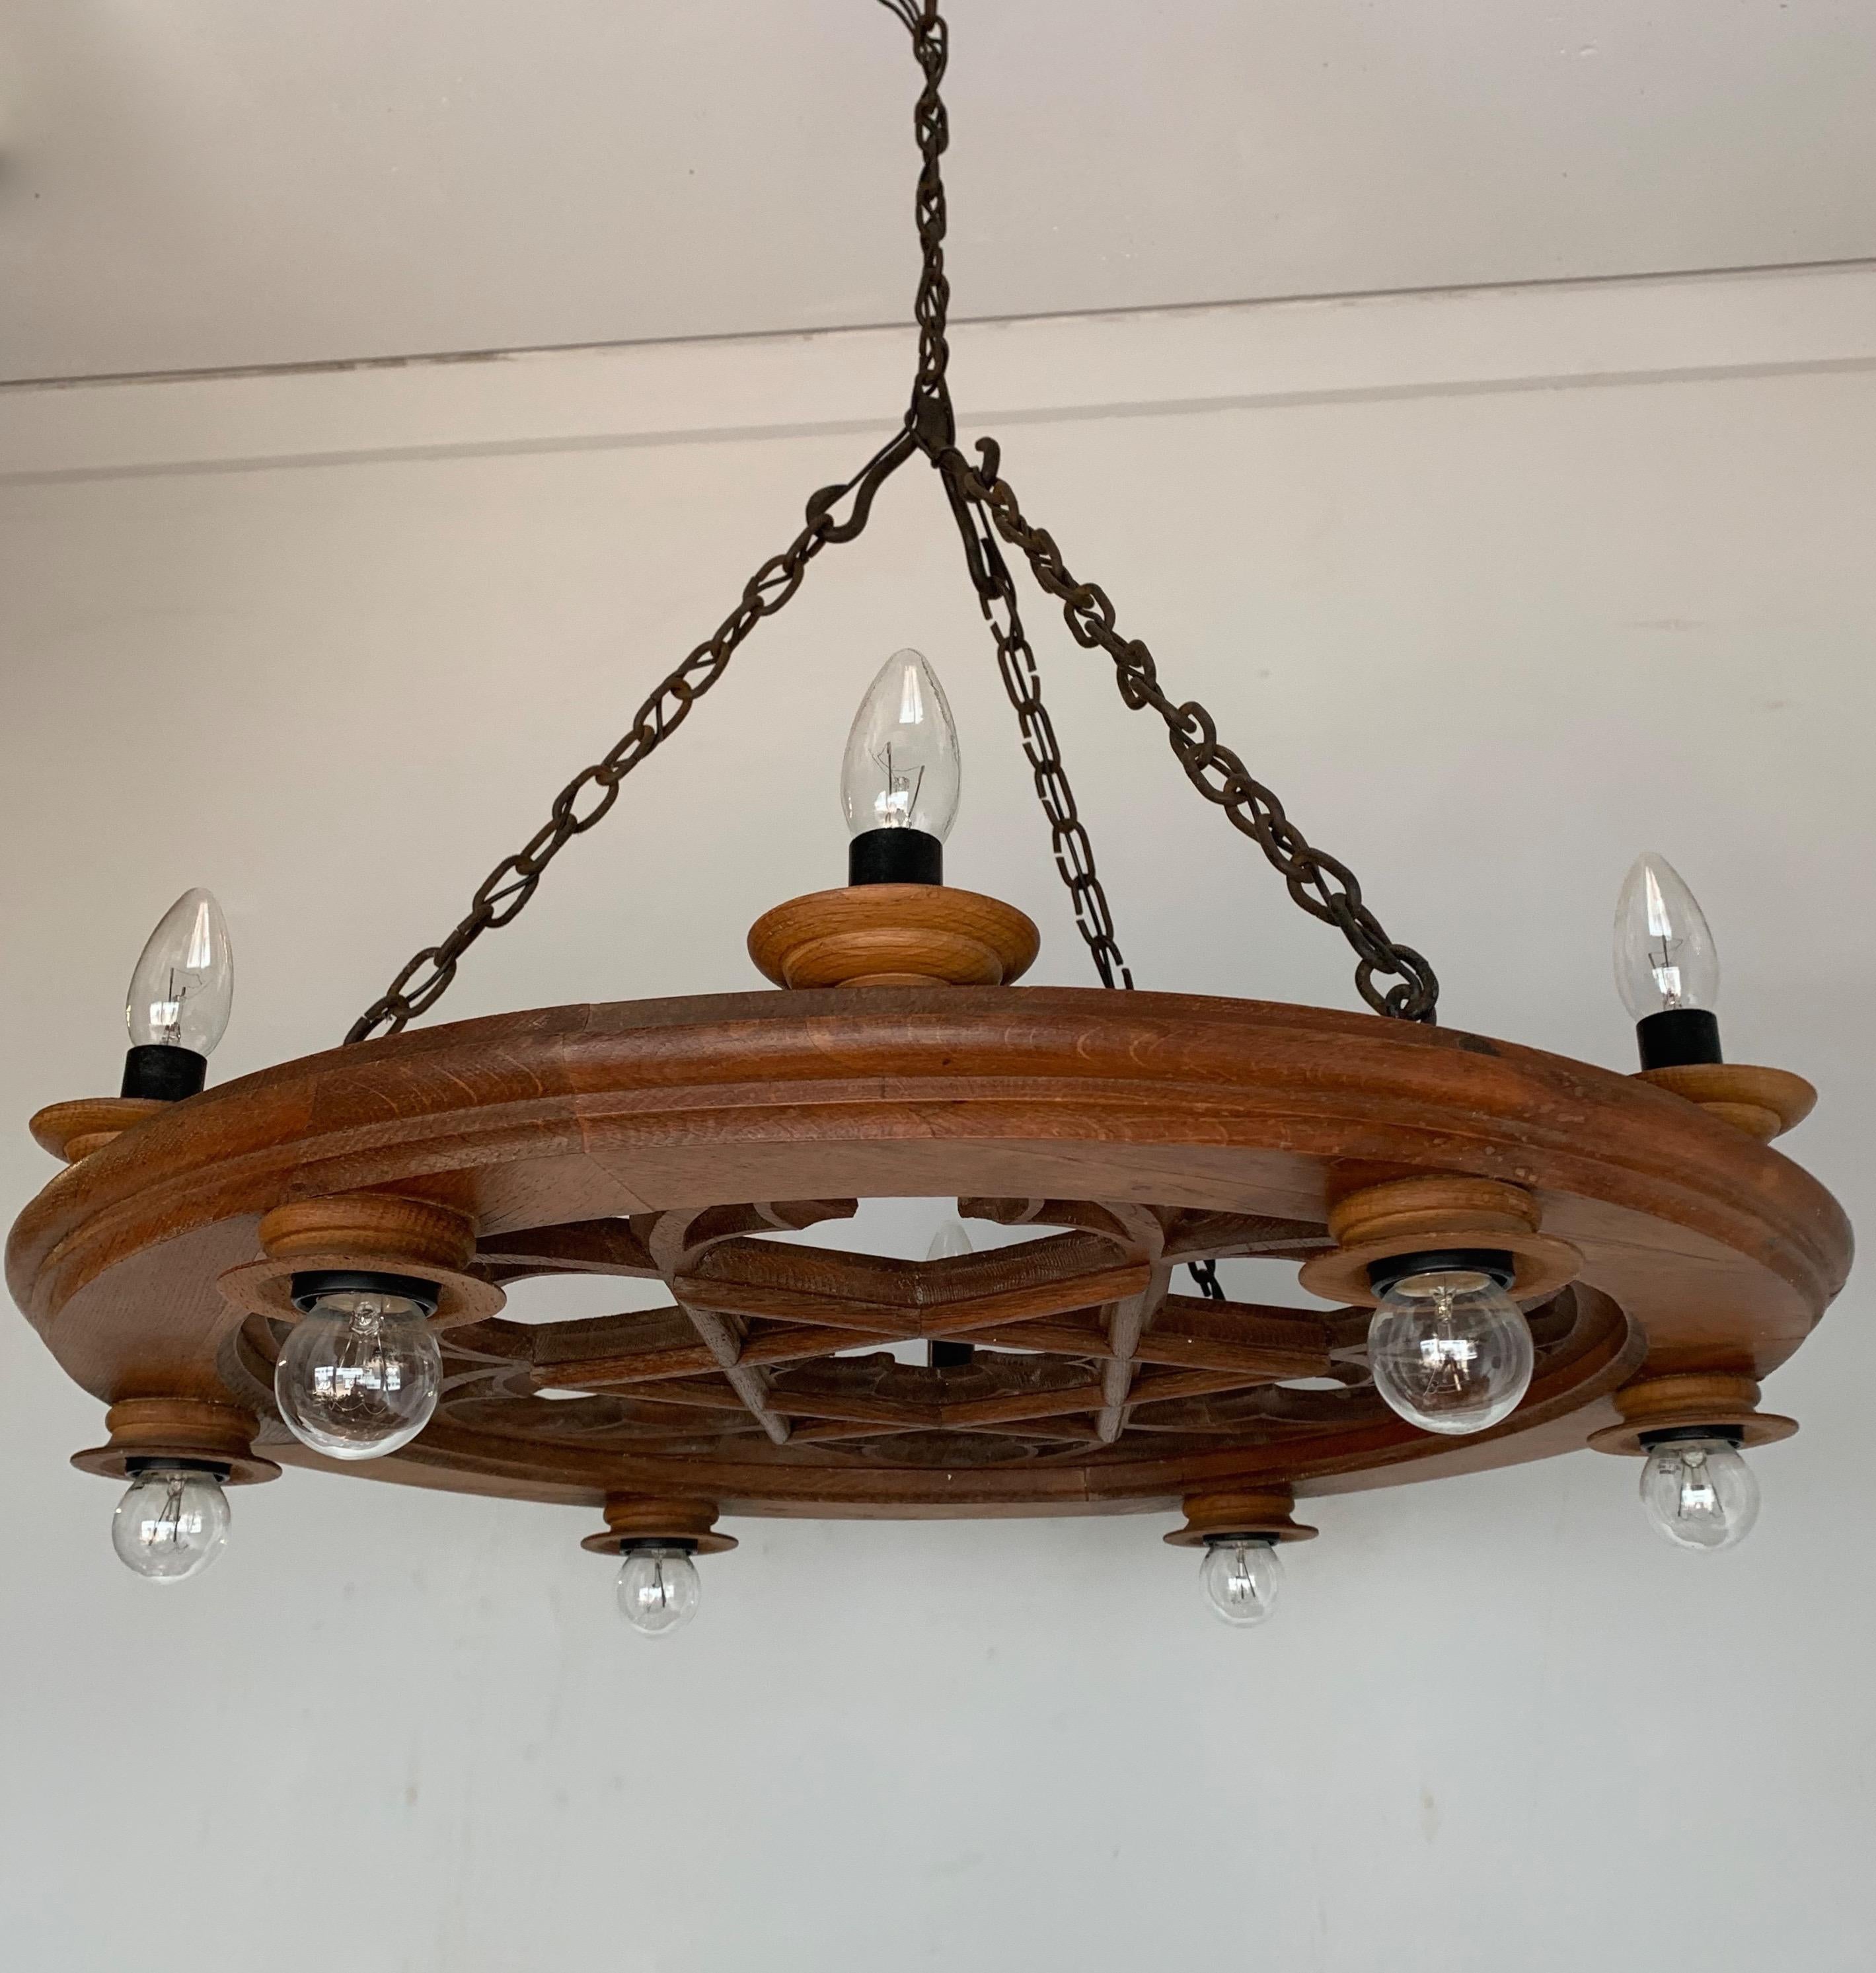 Hand-Crafted Rare & Antique Handcrafted Oak Gothic Revival Church Pendant Light / Chandelier